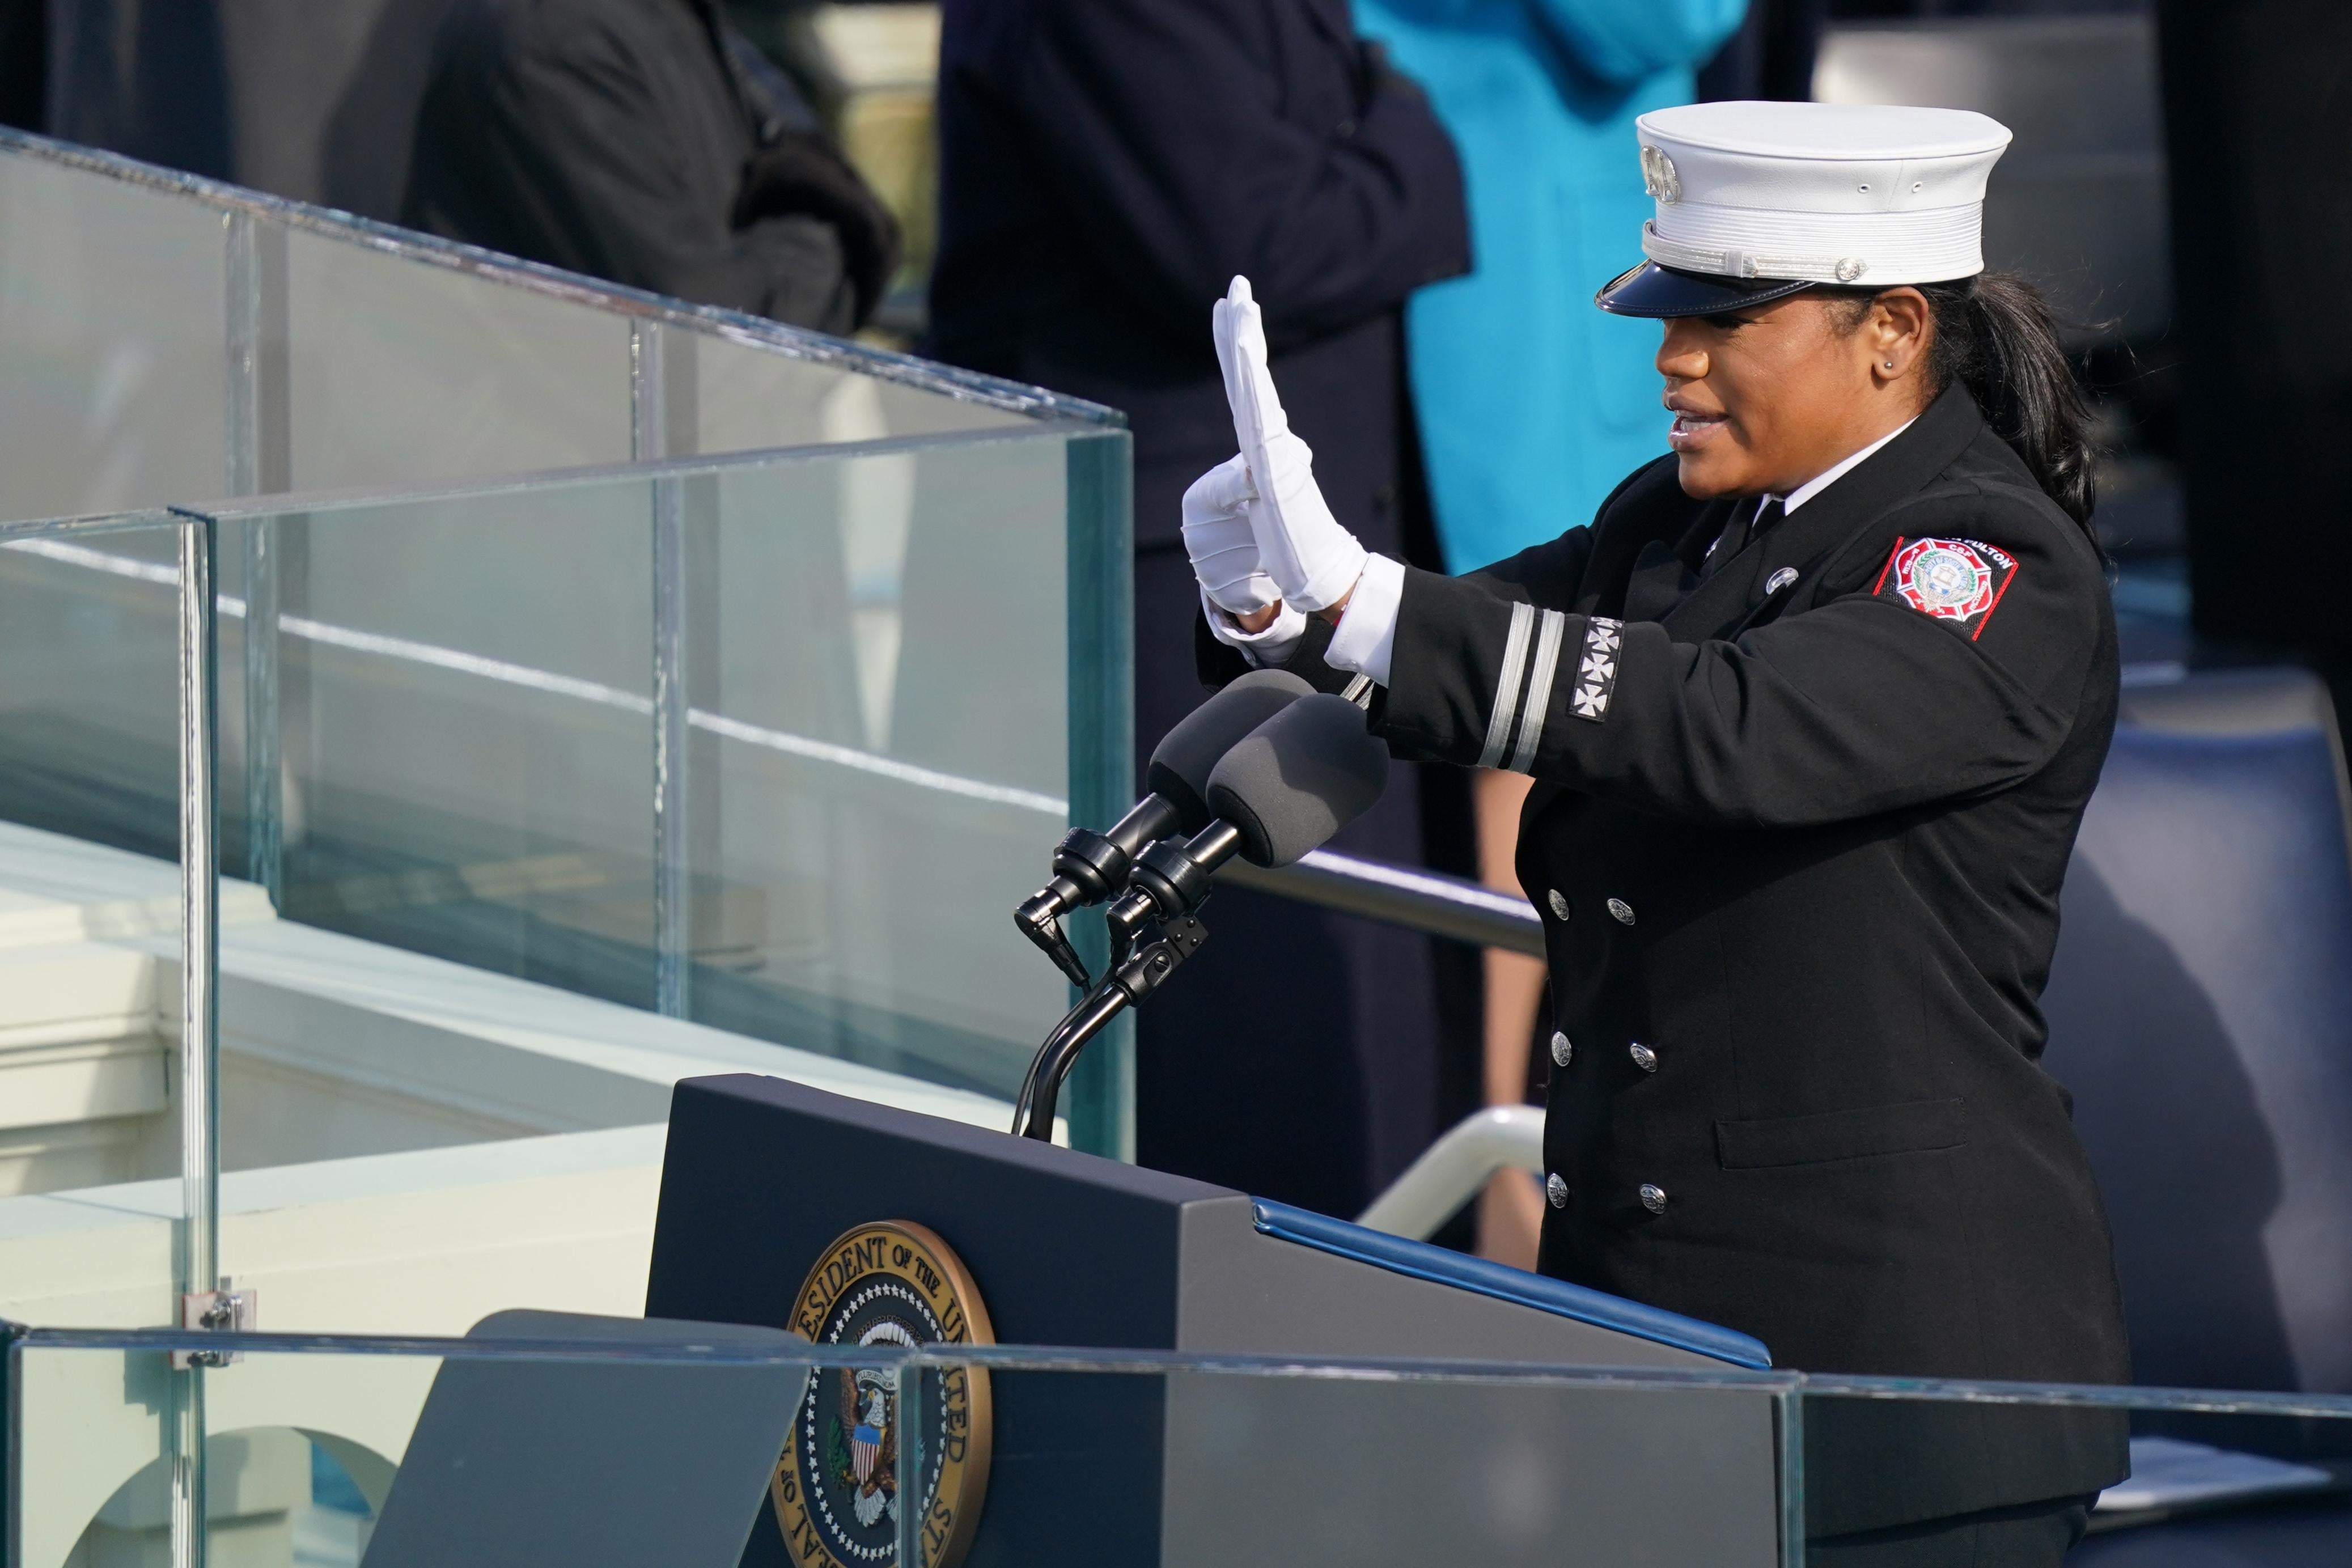 A woman in uniform at a lectern signs.